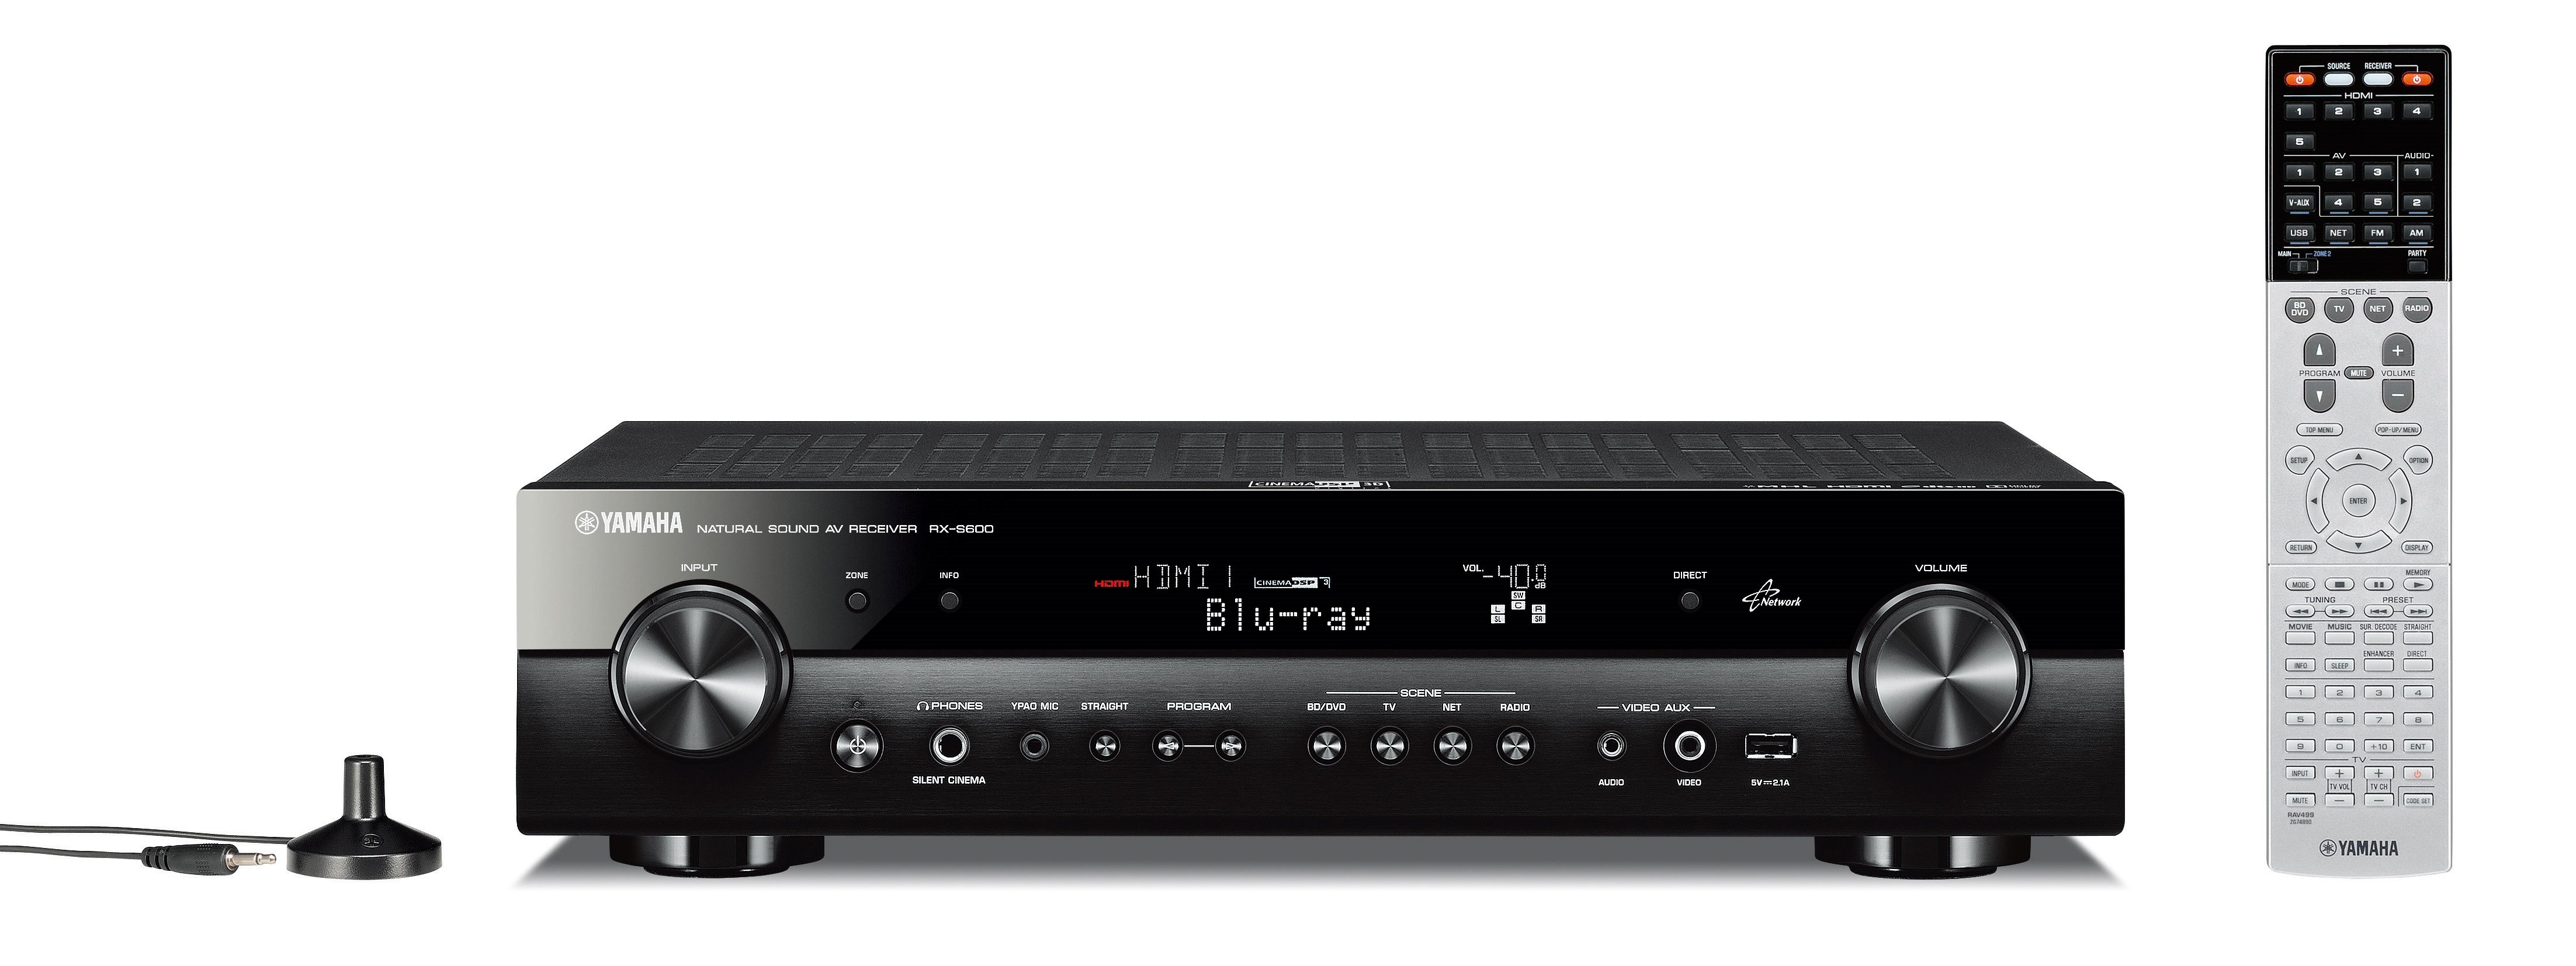 RX-S600 - Features - AV Receivers - Audio & Visual - Products 